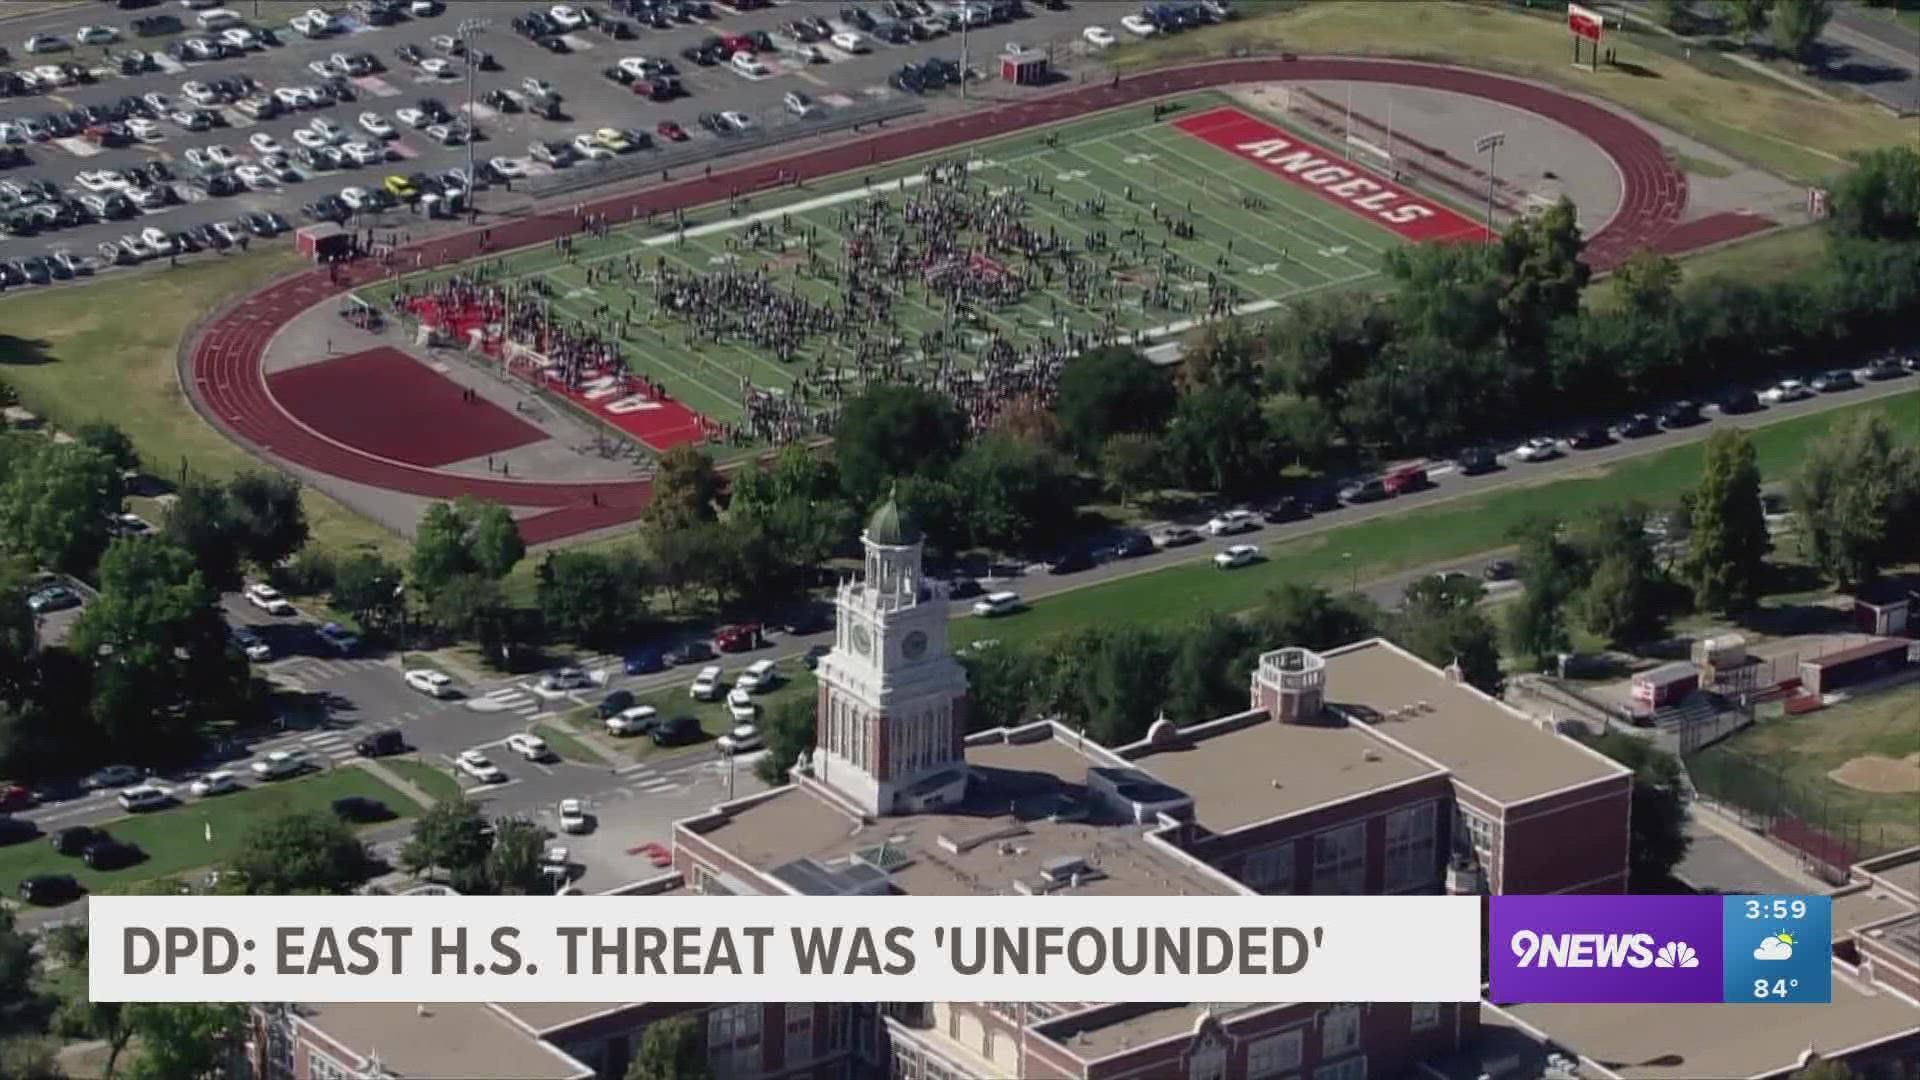 The school was deemed safe and students were dismissed by 3:45 p.m.